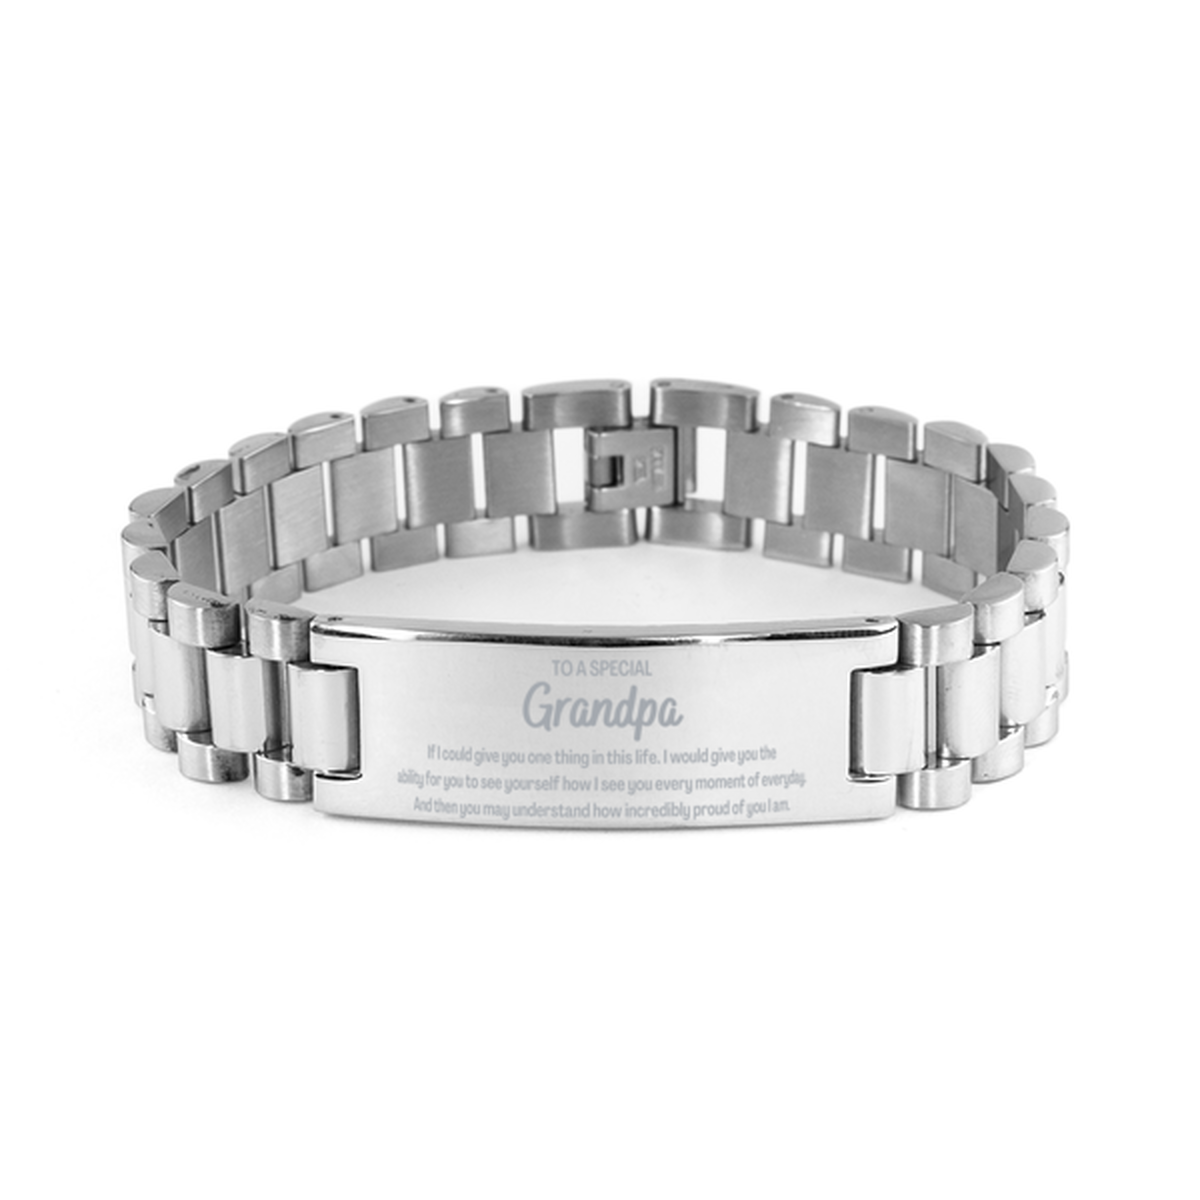 To My Grandpa Ladder Stainless Steel Bracelet, Gifts For Grandpa Engraved, Inspirational Gifts for Christmas Birthday, Epic Gifts for Grandpa To A Special Grandpa how incredibly proud of you I am